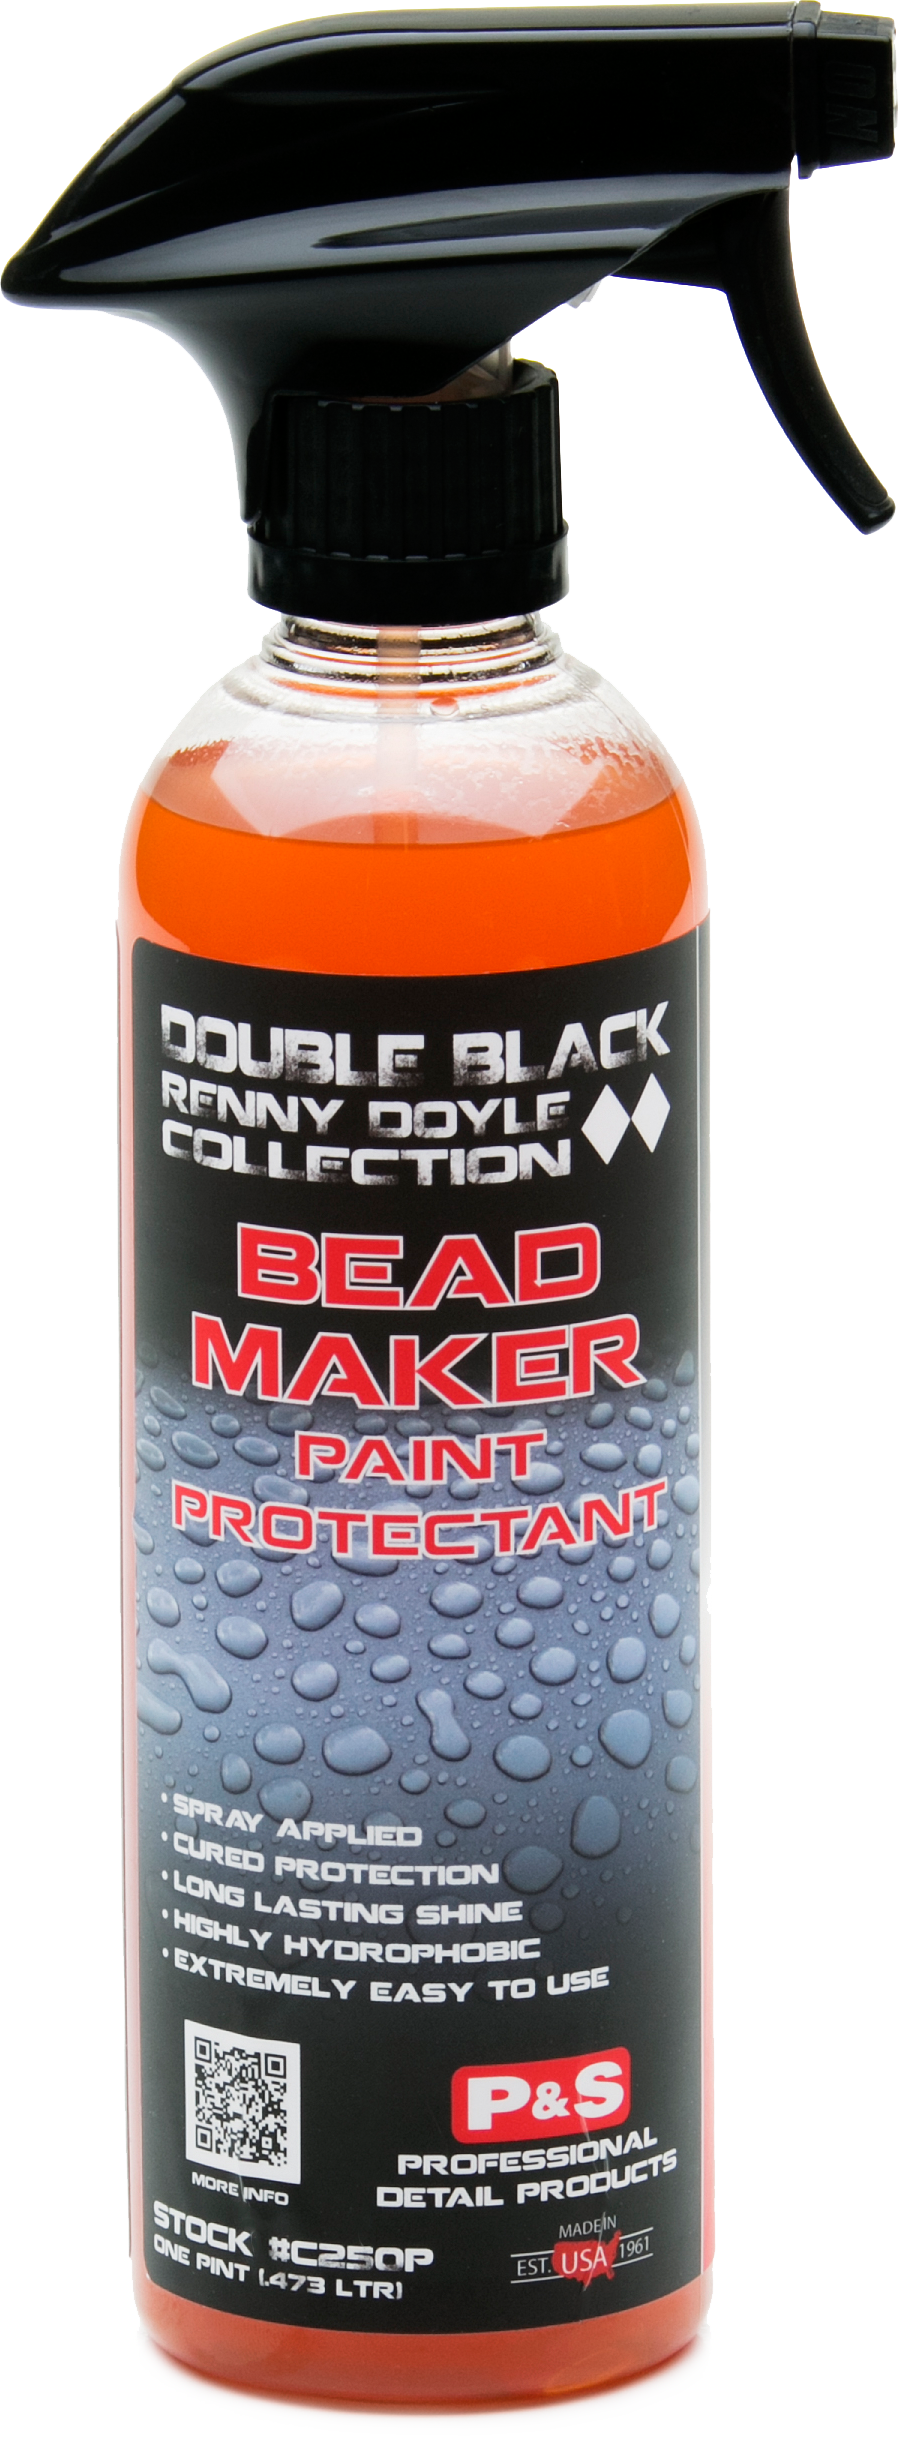 P&S Bead Maker Paint Protector (various sizes)